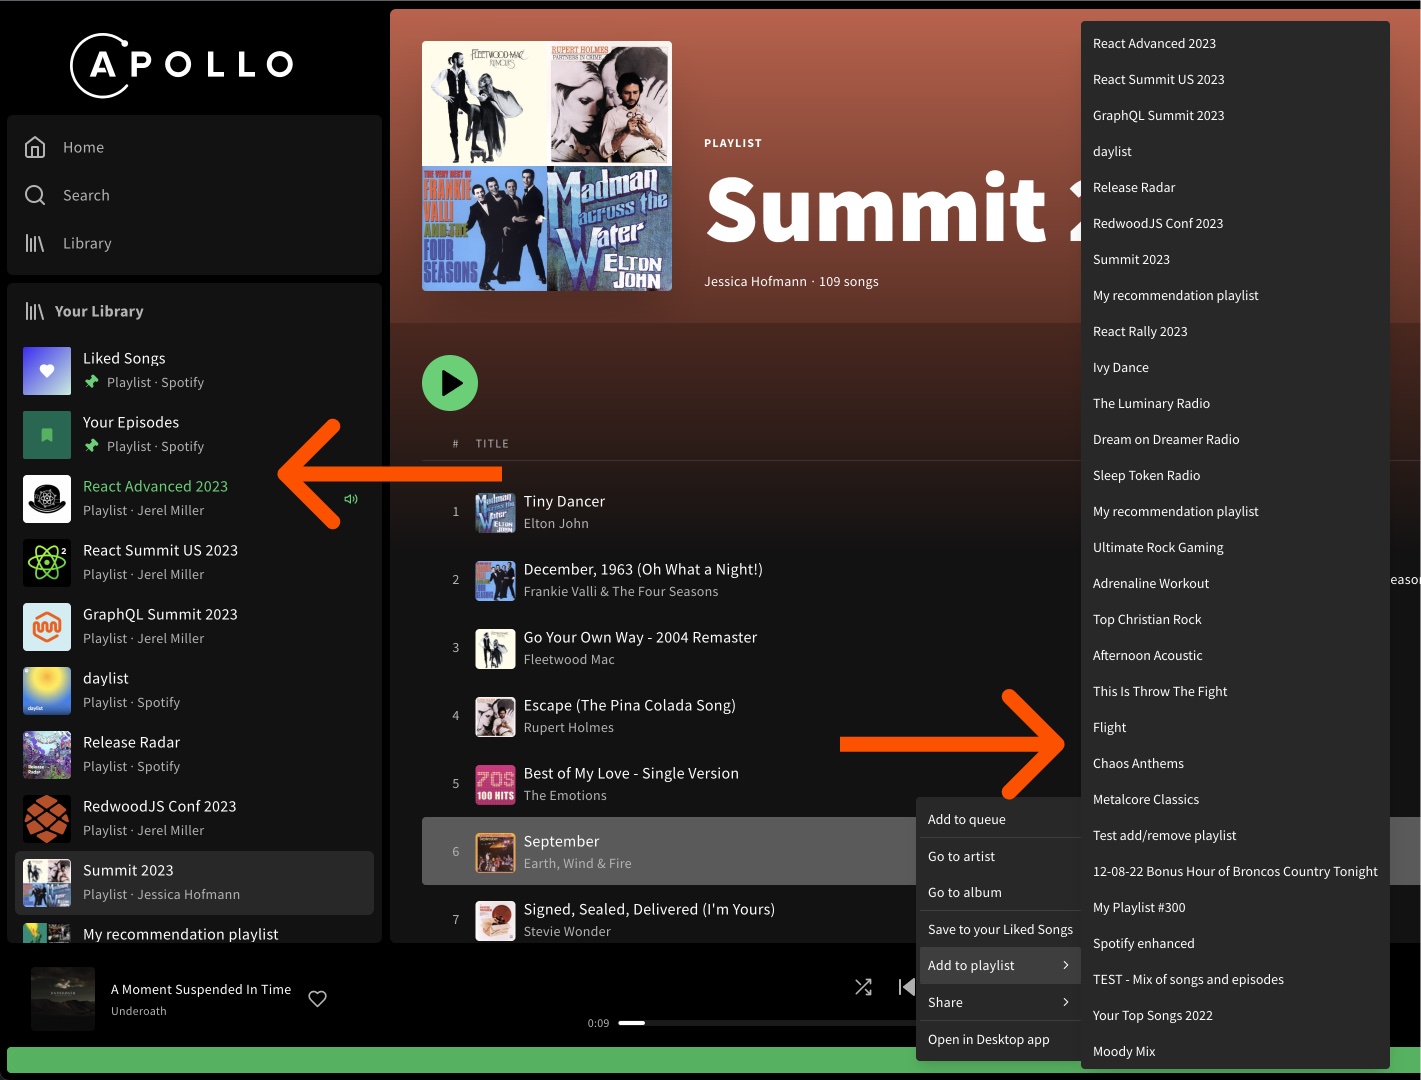 Separately cached playlists in Apollo's Spotify Showcase